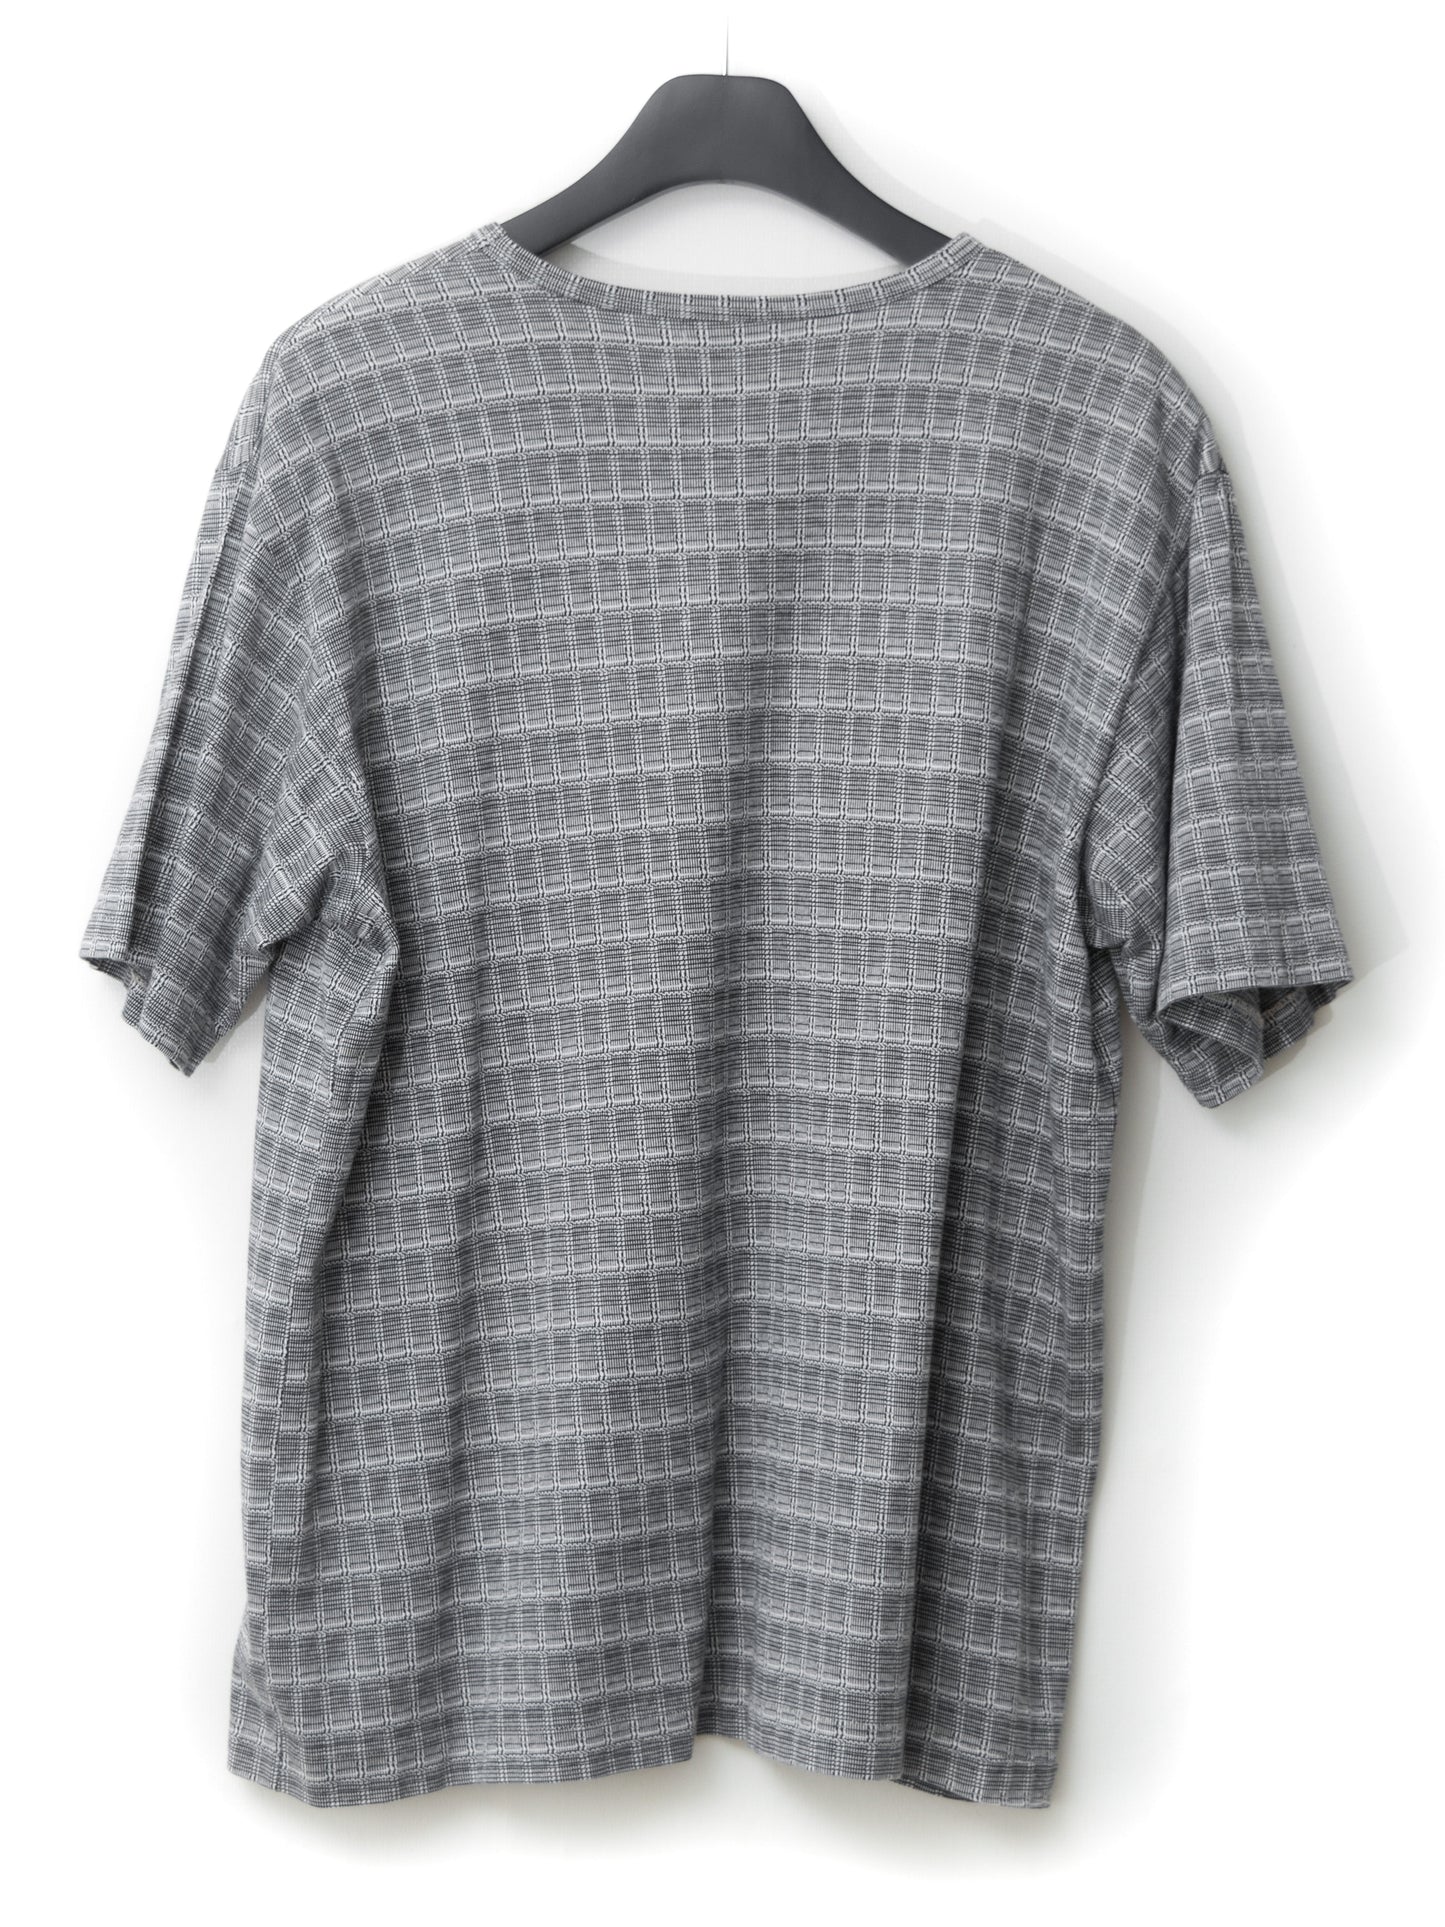 box tee grid ∙ cotton ∙ one size